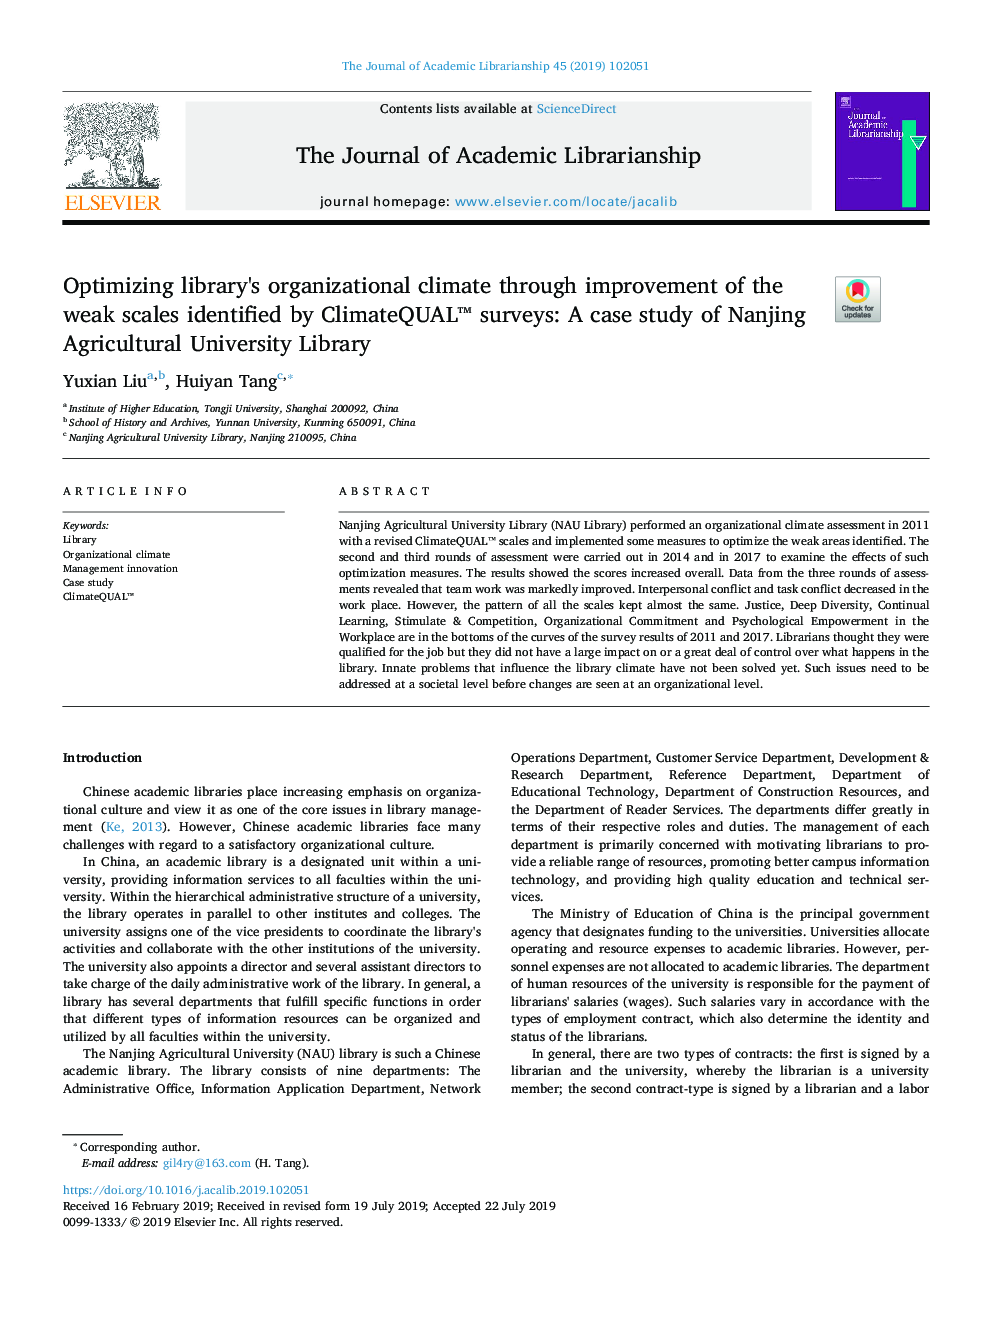 Optimizing library's organizational climate through improvement of the weak scales identified by ClimateQUALâ¢ surveys: A case study of Nanjing Agricultural University Library